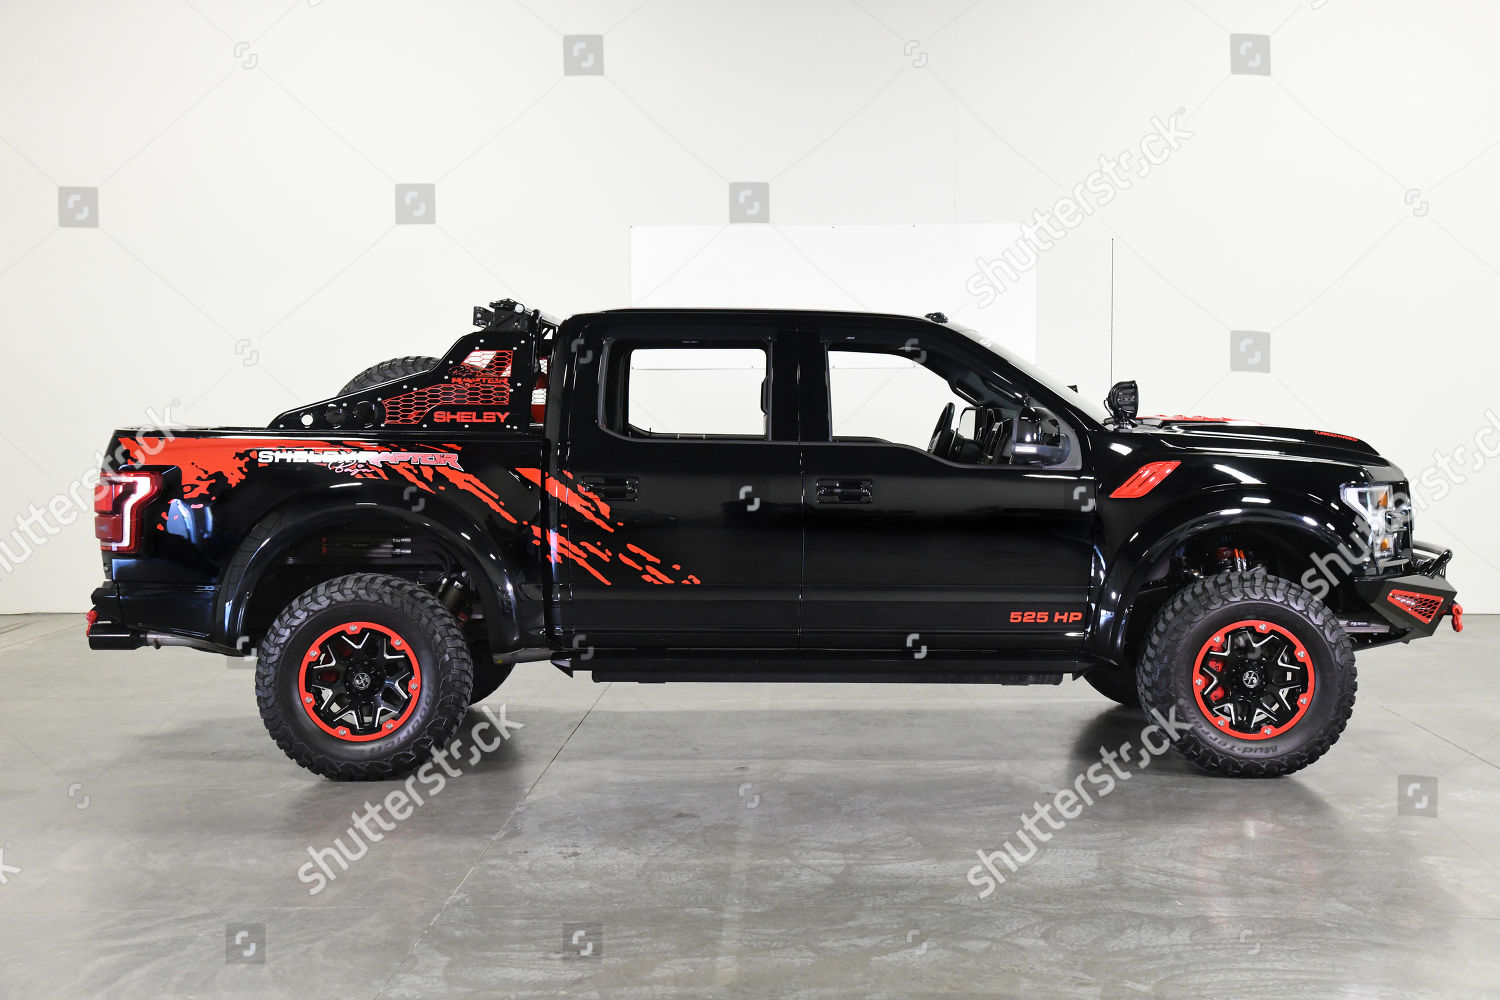 2018 Ford F150 Shelby Raptor Baja 525hp Editorial Stock